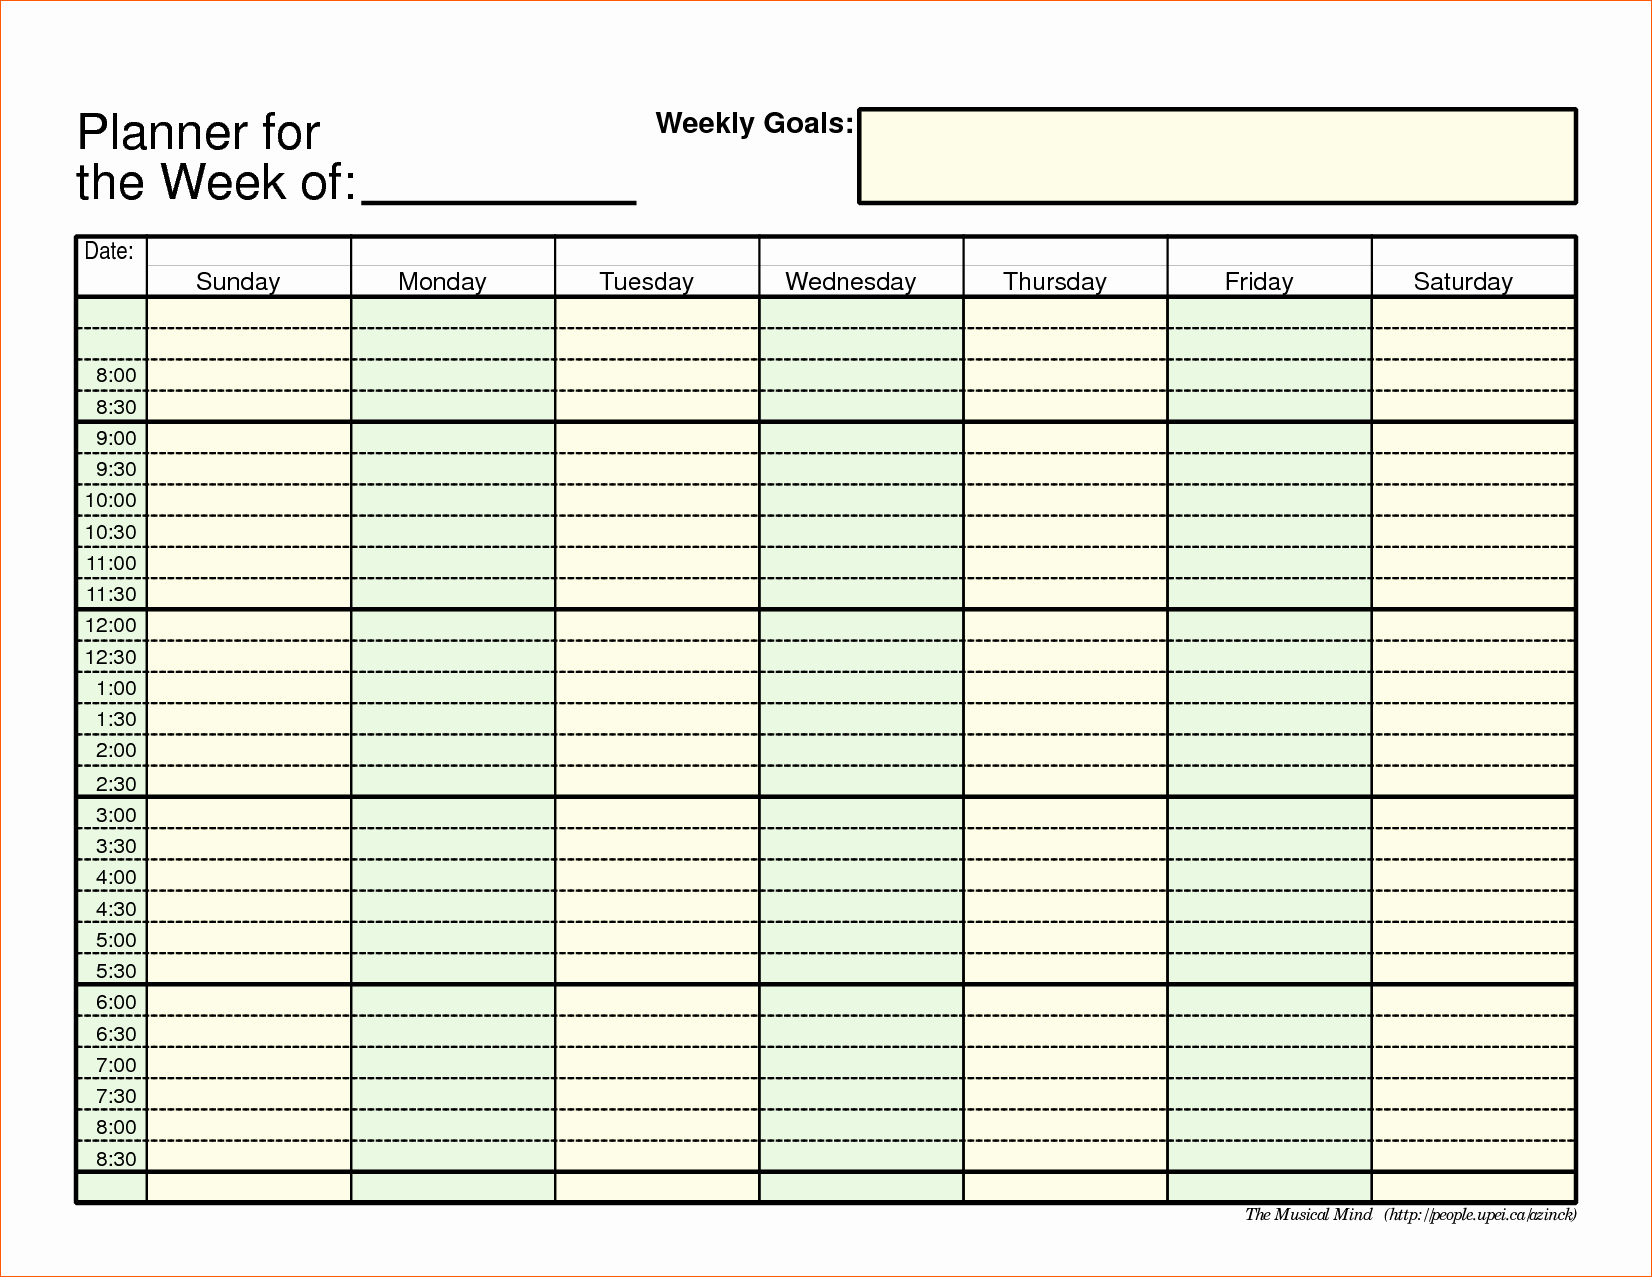 13 Daily Planner Template